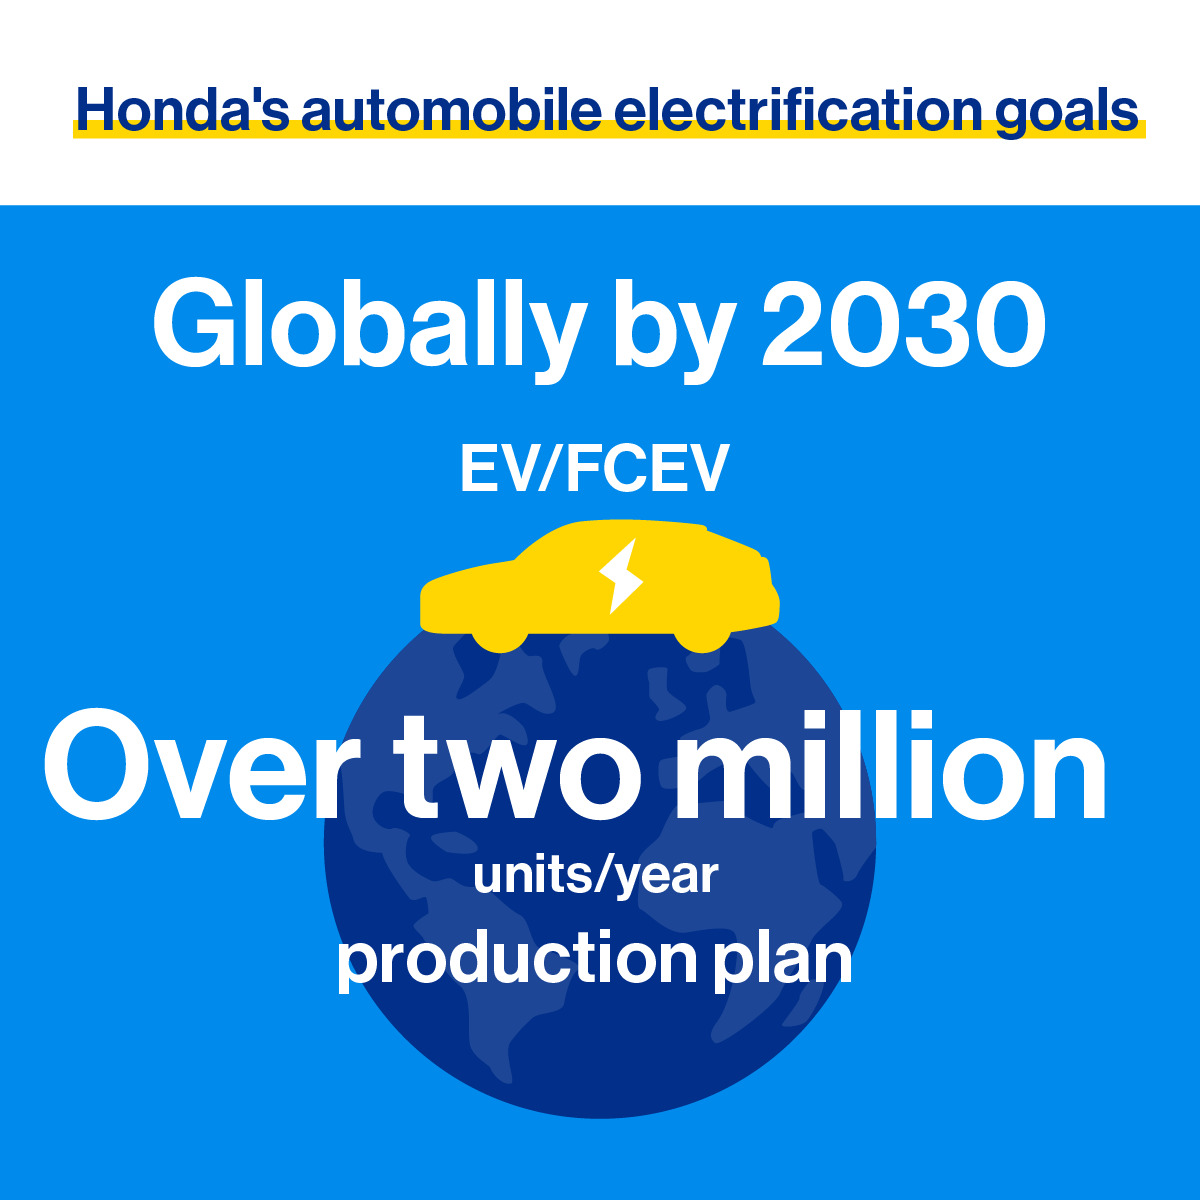 Honda's goal is to achieve over two million units/year production plan of EV/FCEV globally by 2030